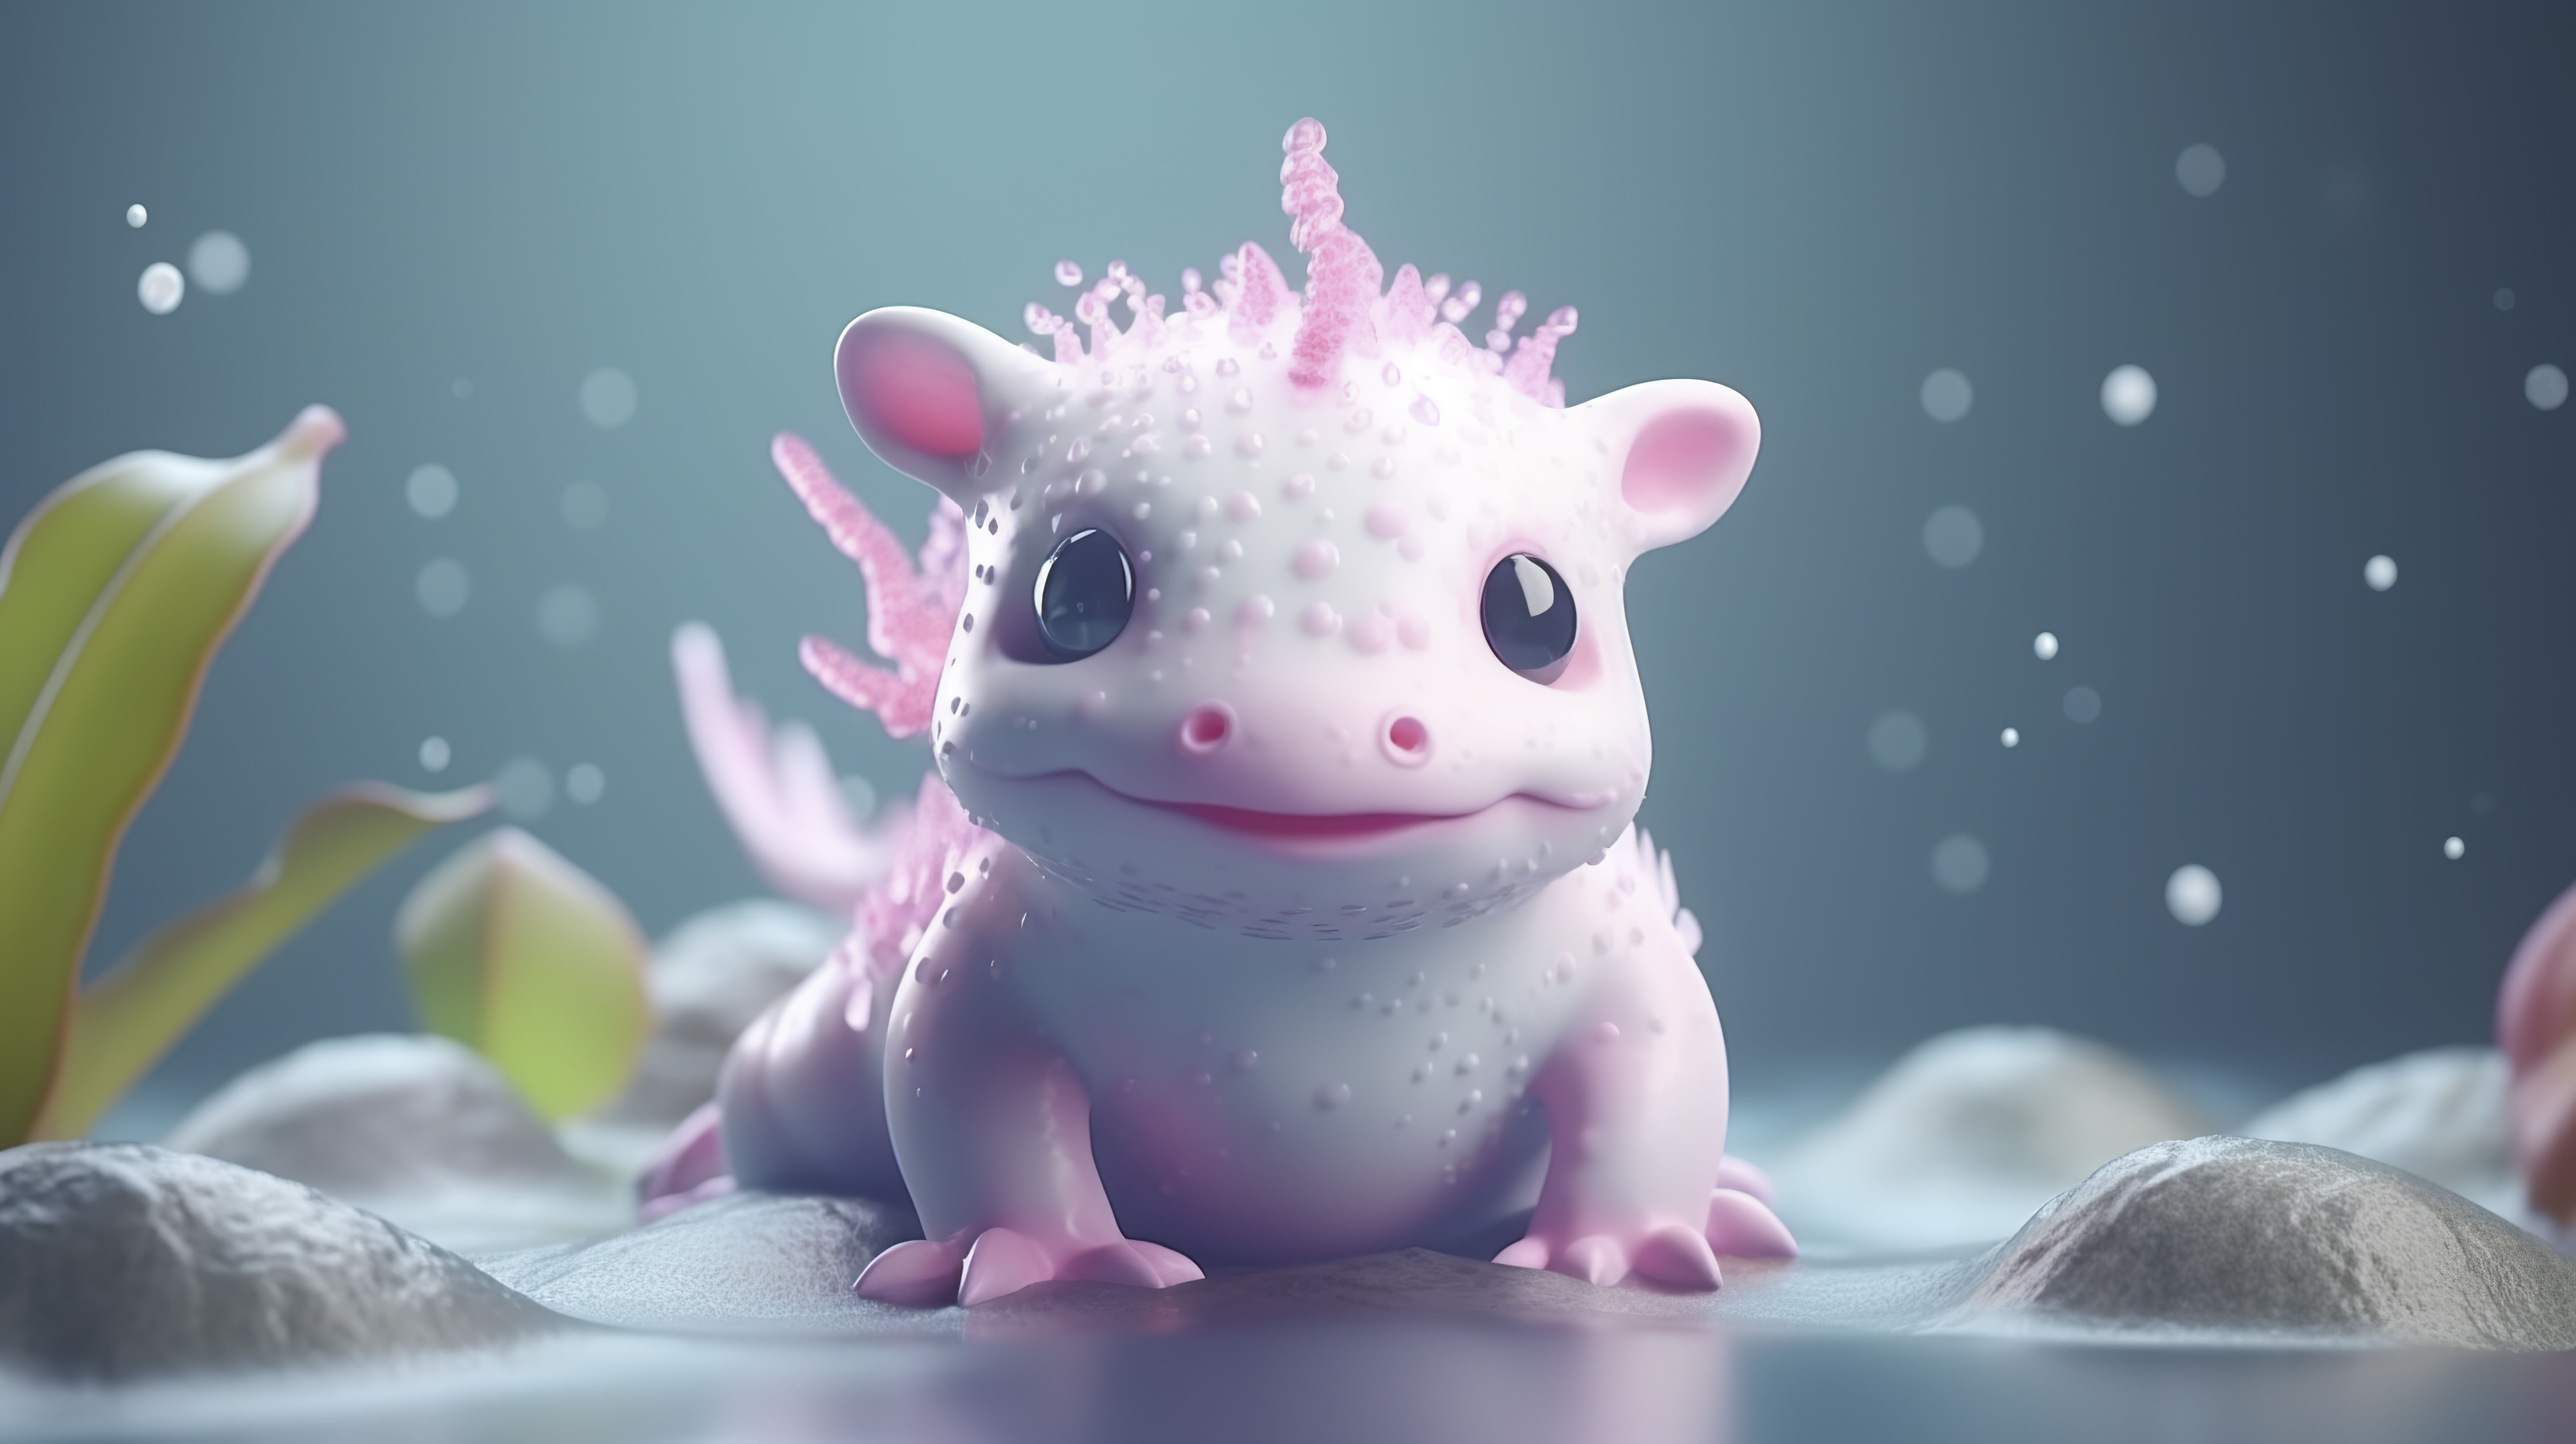 Cute axolotl Mexican Salamander 750x1334 iPhone 8766S wallpaper  background picture image